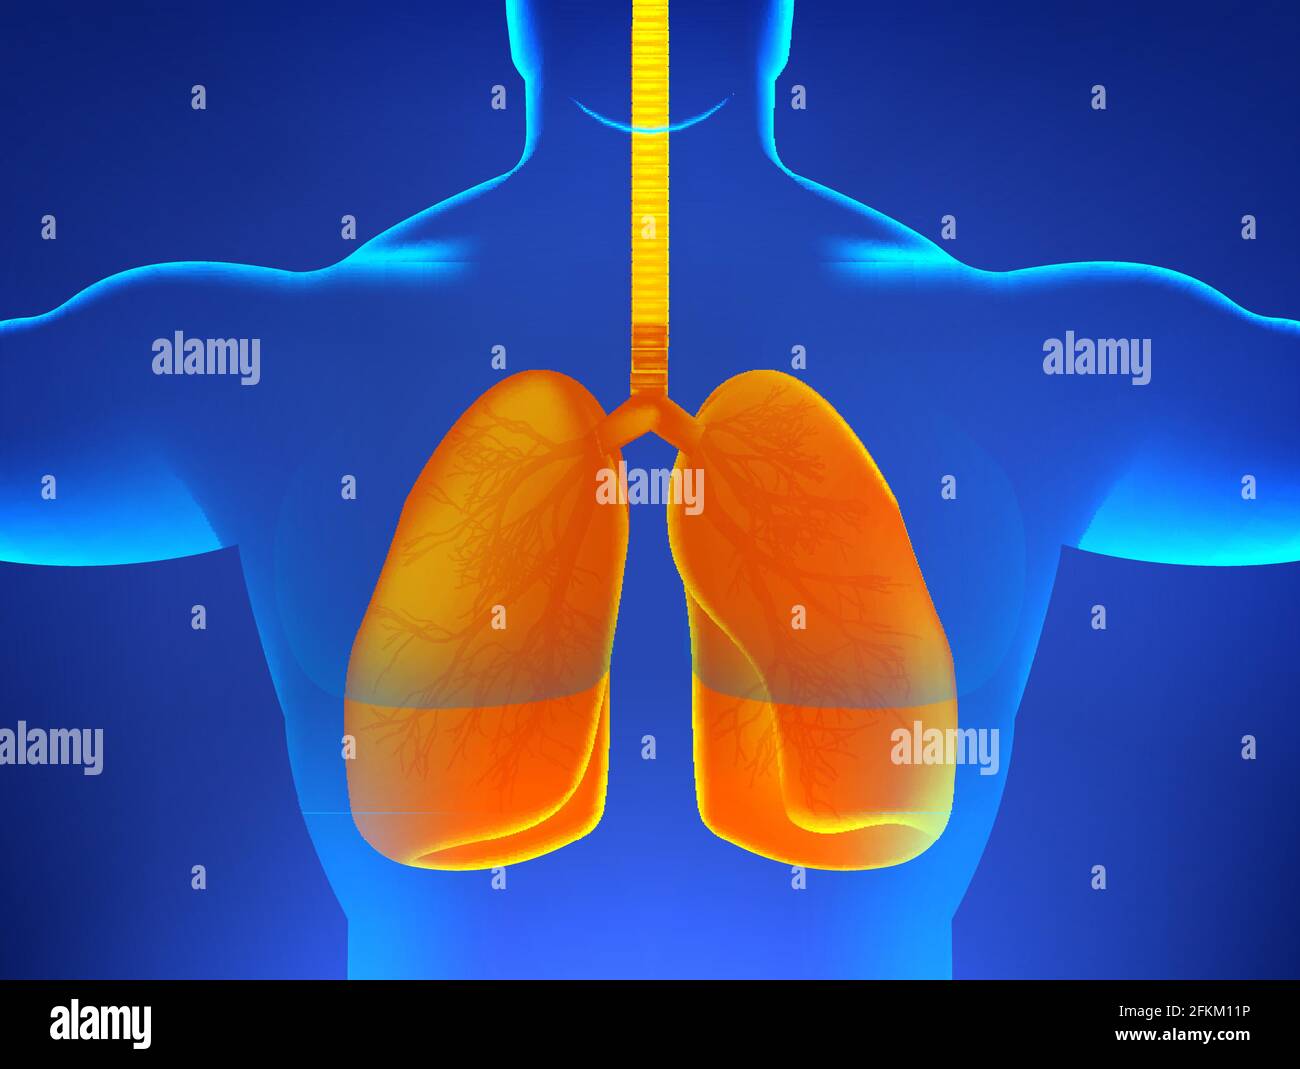 X-ray human body with sick lungs, pneumonia, virus, asthma or other diseases associated with the human lungs. 3D human body hologram and orange lungs Stock Vector